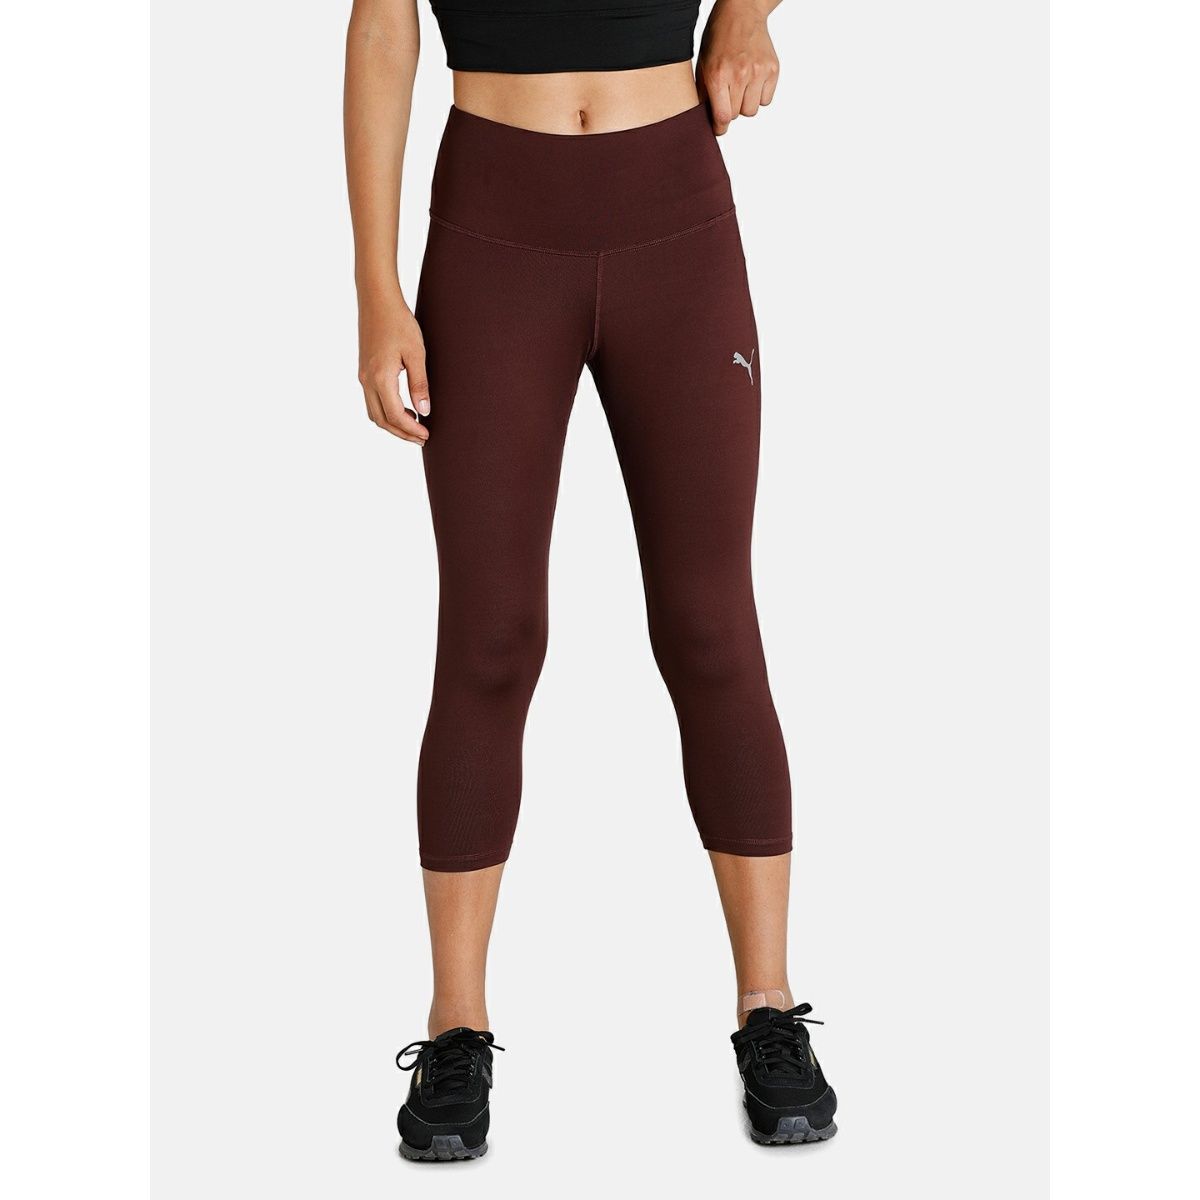 Puma Women Black Solid Ignite 34th Tights Price in India Full  Specifications  Offers  DTashioncom